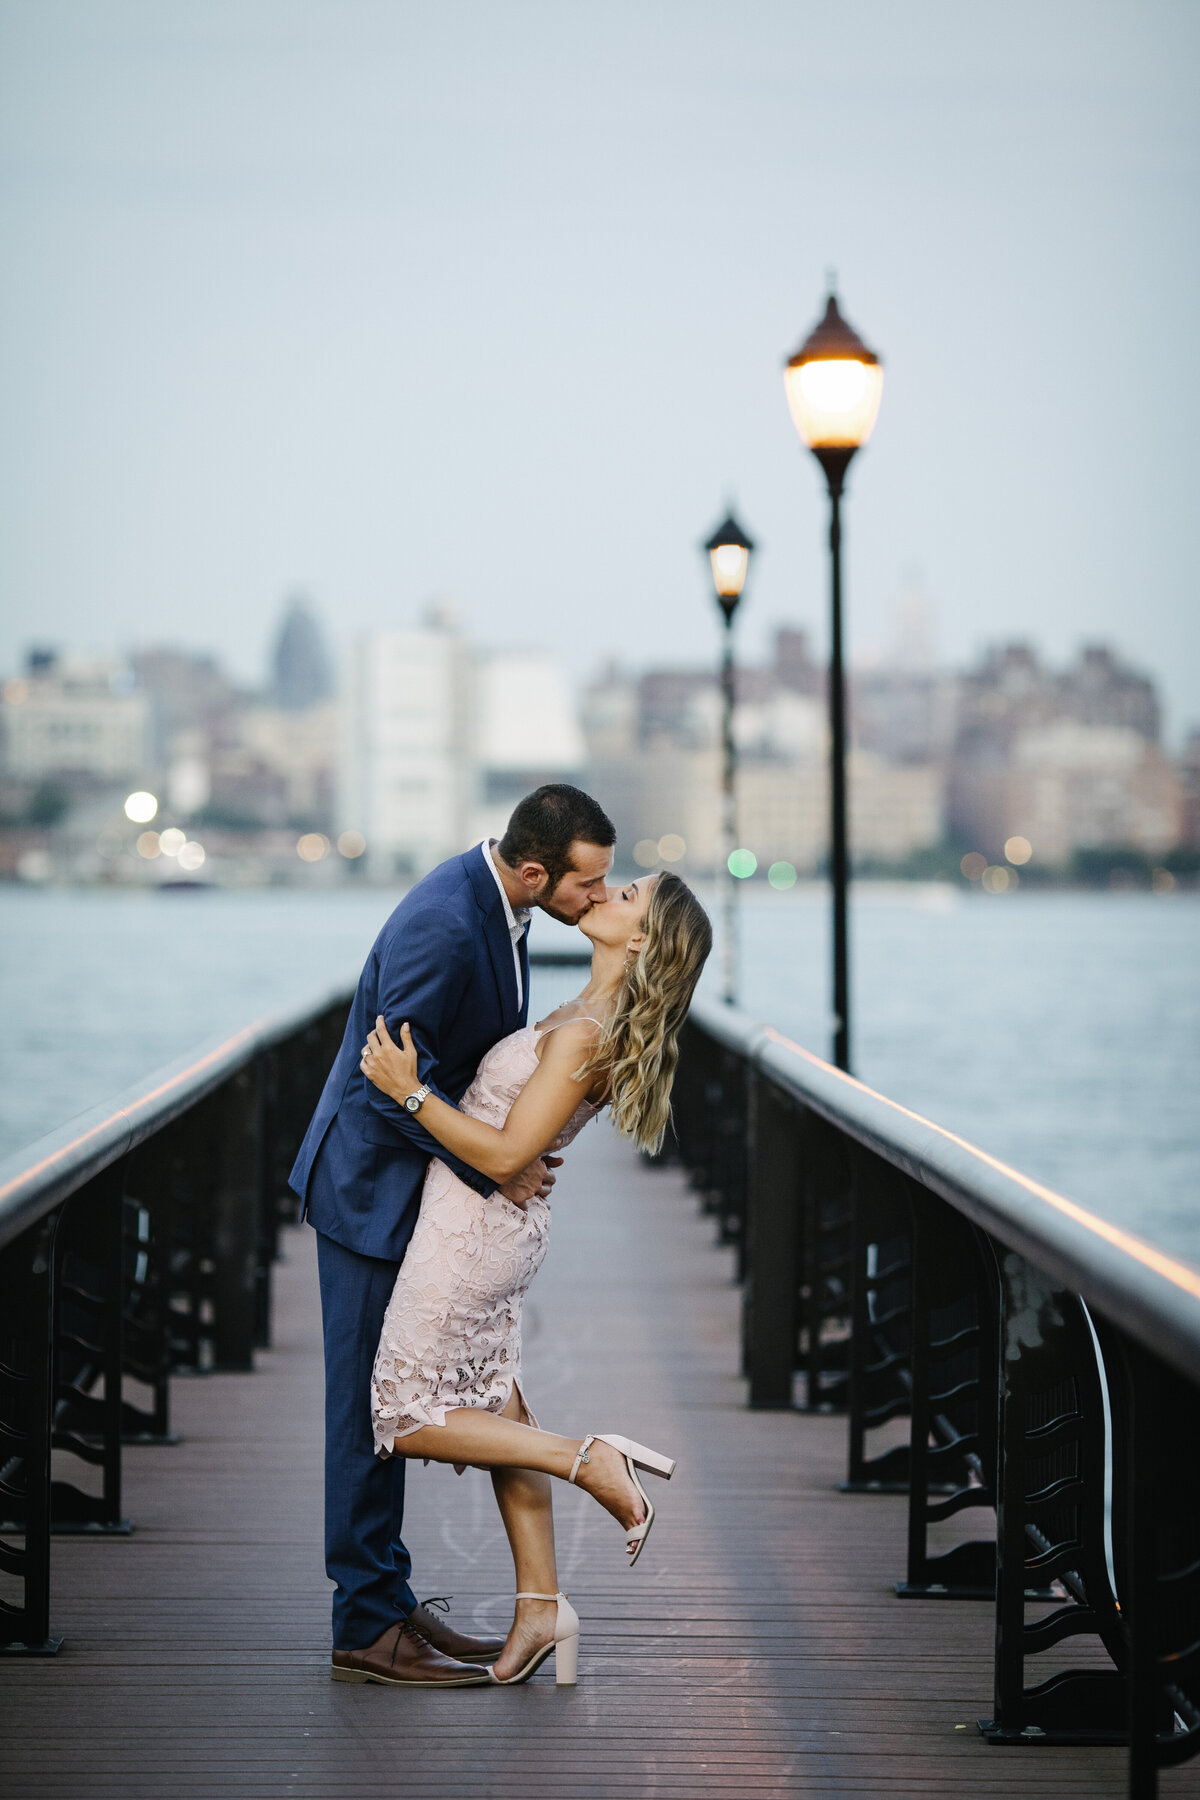 New Jersey Wedding Photographers	Hoboken, NJ	Hoboken City Streets Train Station Pier Hudson River	Engagement Session	Summer August	Elegant Luxury Artistic Modern Editorial Light and Airy Natural Chic Stylish Timeless Classy Classic Romantic Couture Fine Art Experienced Professional Love Couples Emotional Genuine Authentic Real Fashion Fairy Tale Dream Lovers Jersey Shore Intimate	Engagement Session Photos Portraits Image 44